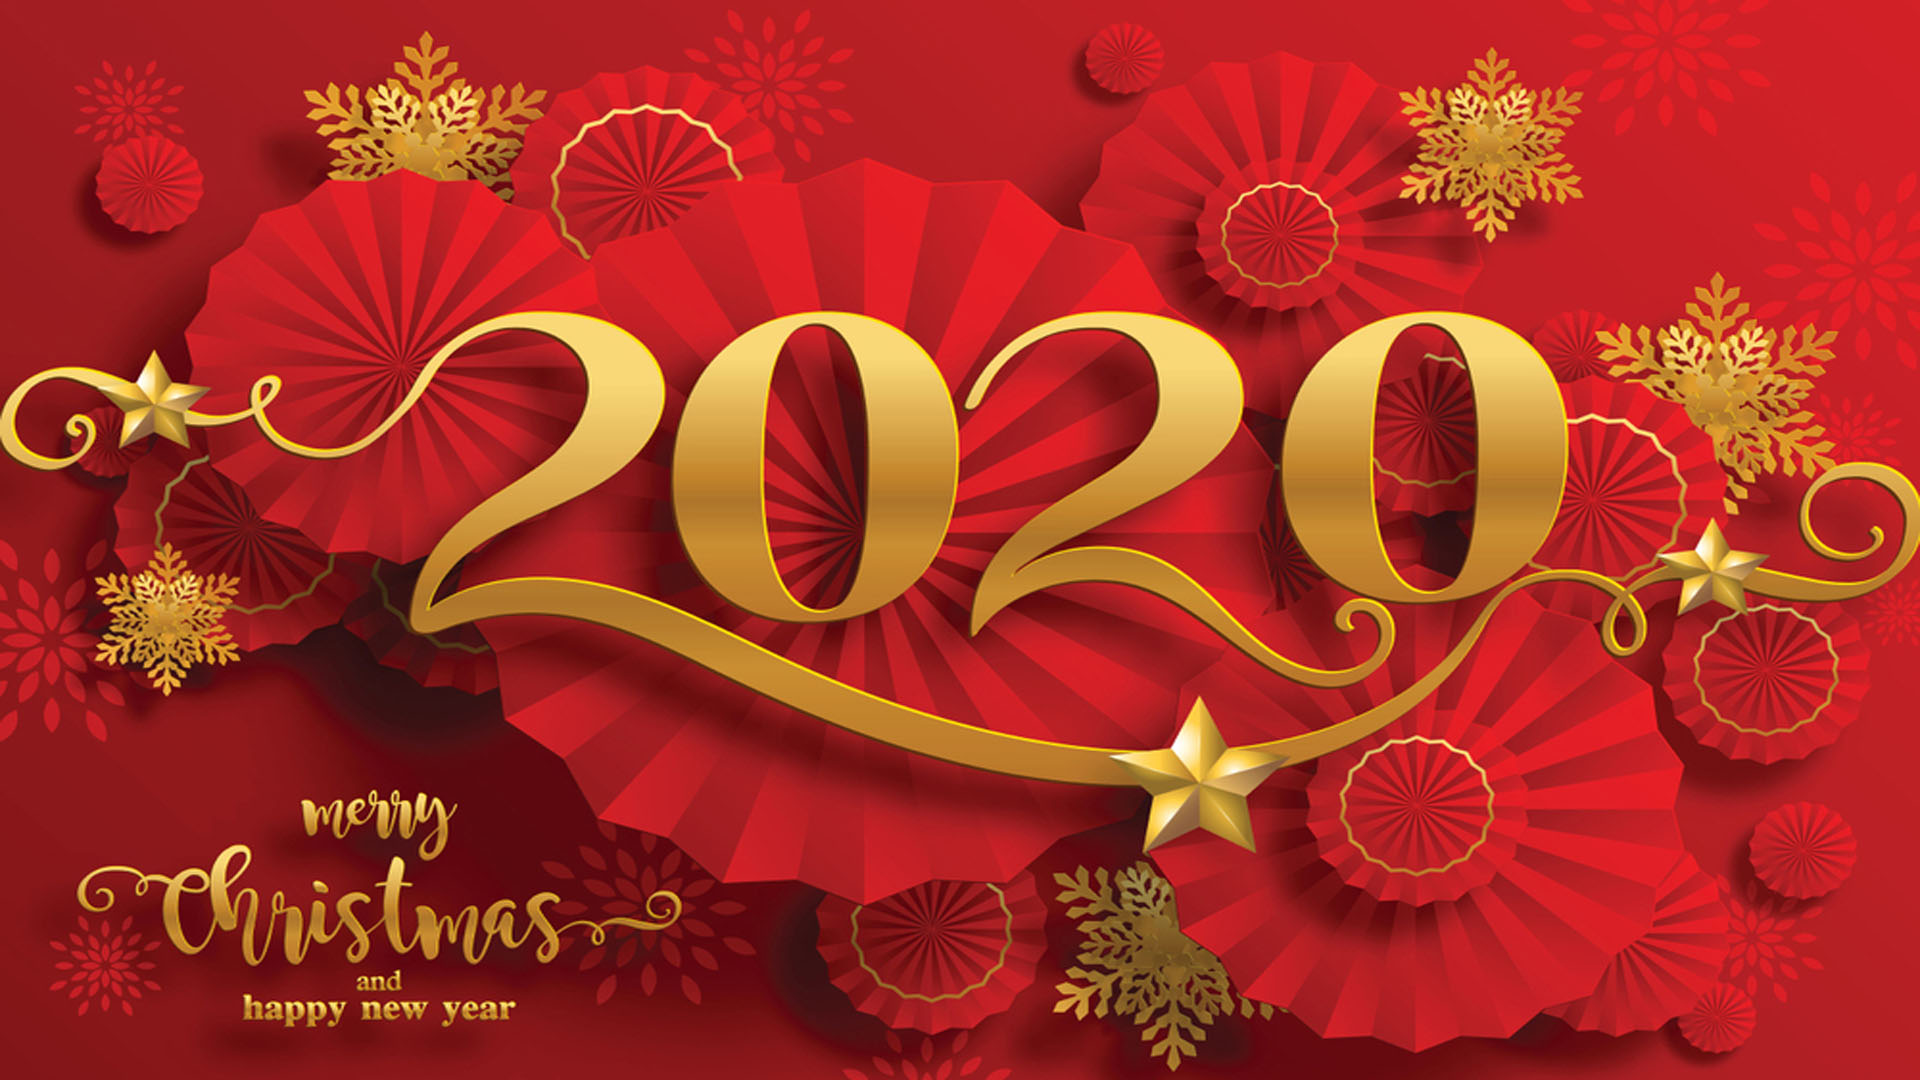 Chinese New Year 2020 Greeting Card For Mobile Phones Tablet And Pc : Wallpapers13.com1920 x 1080